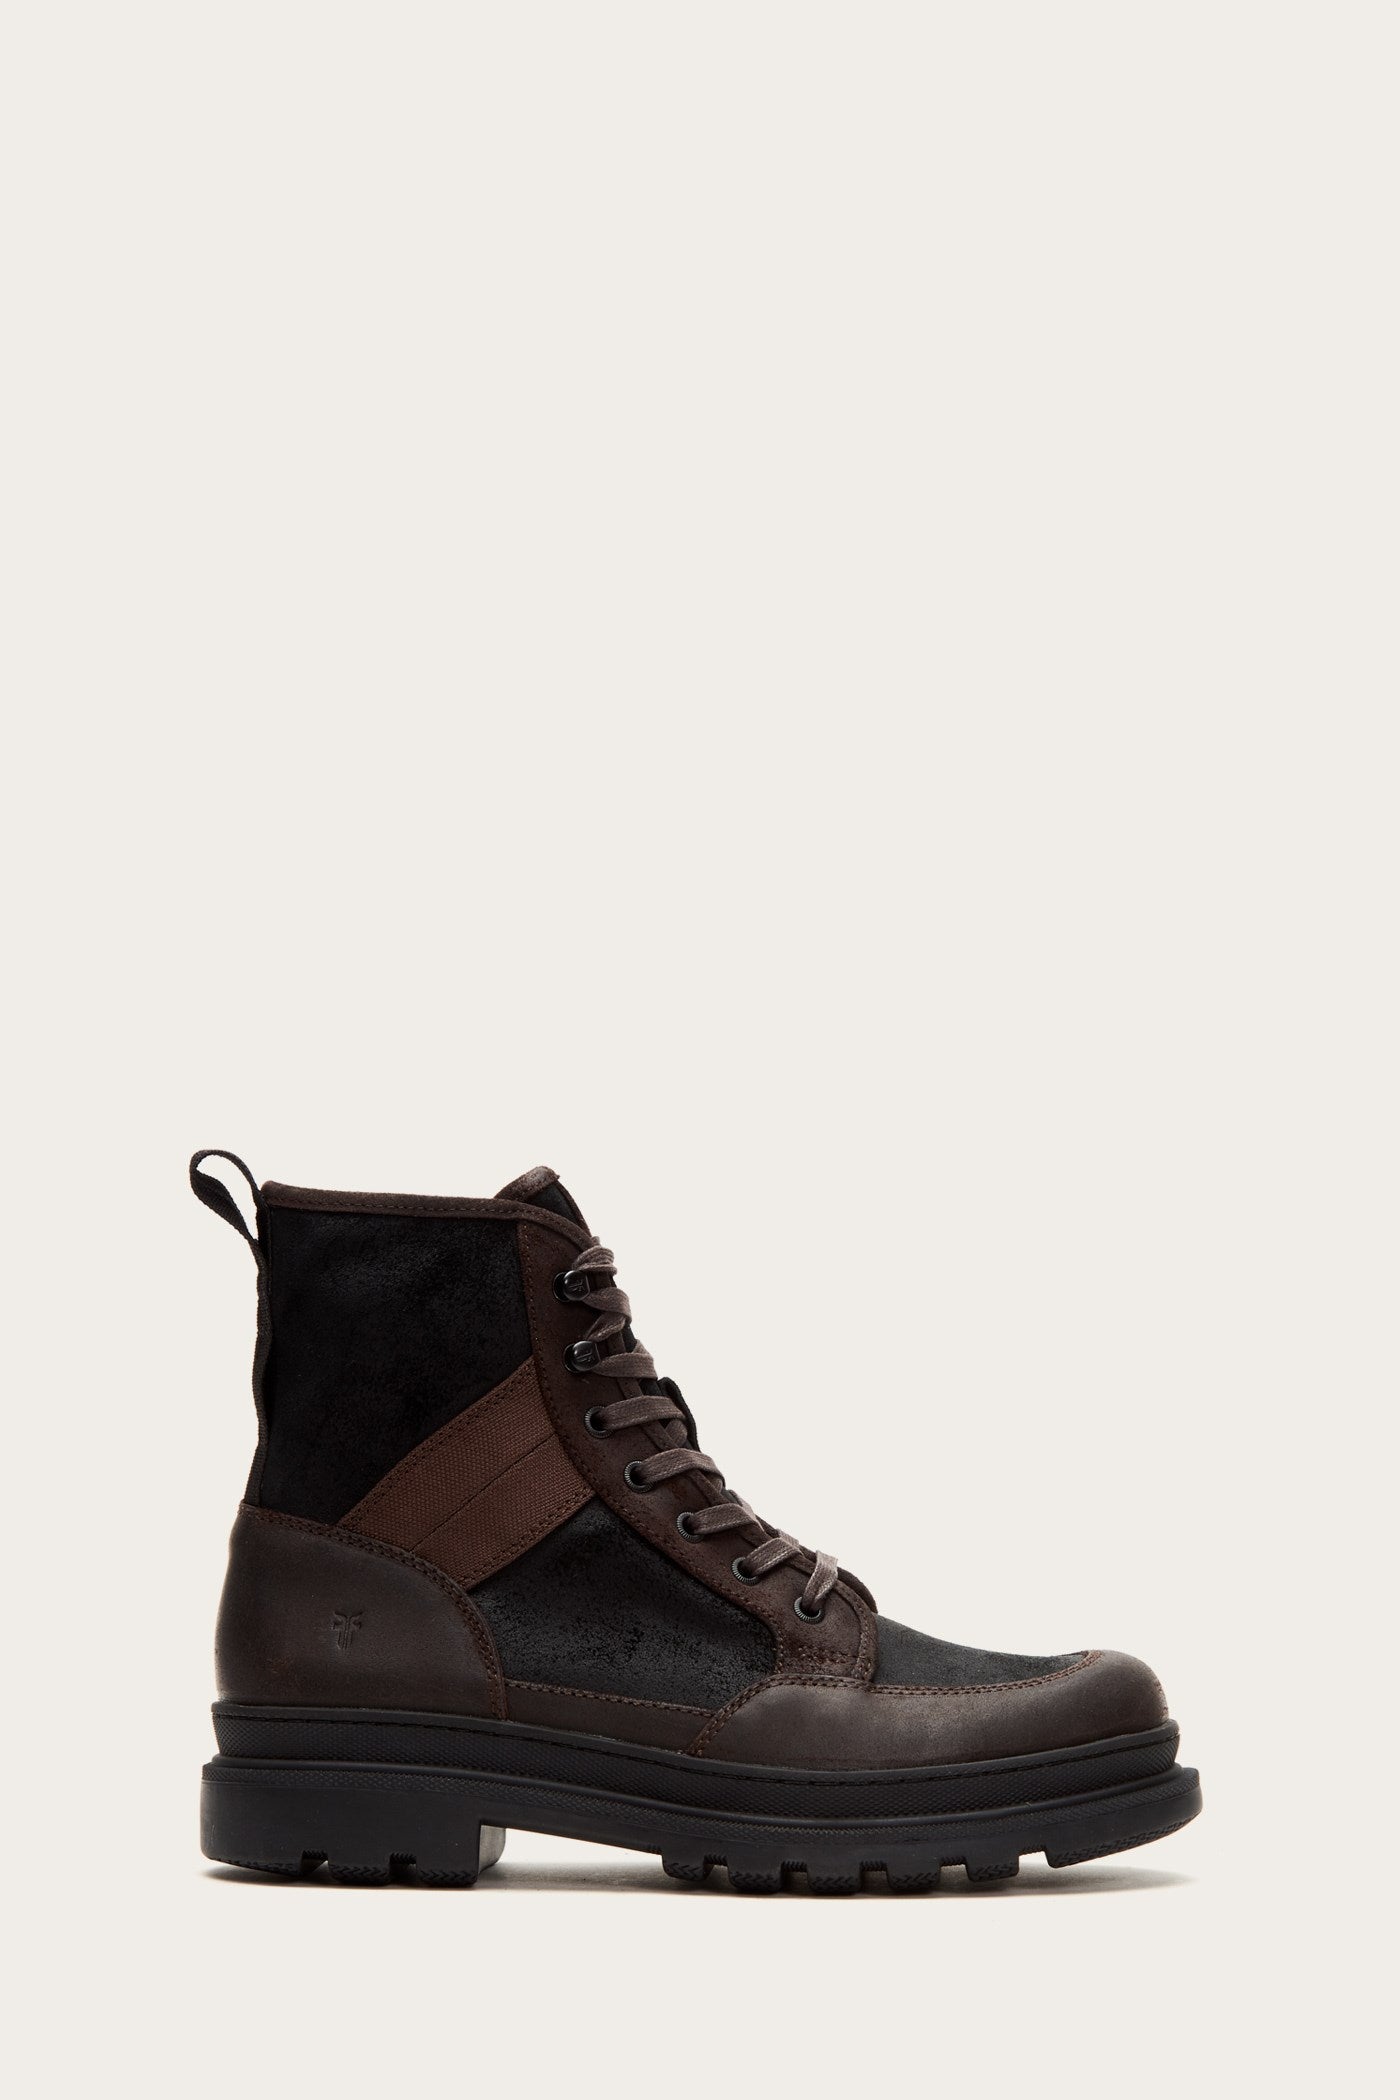 Scout Boot | The Frye Company